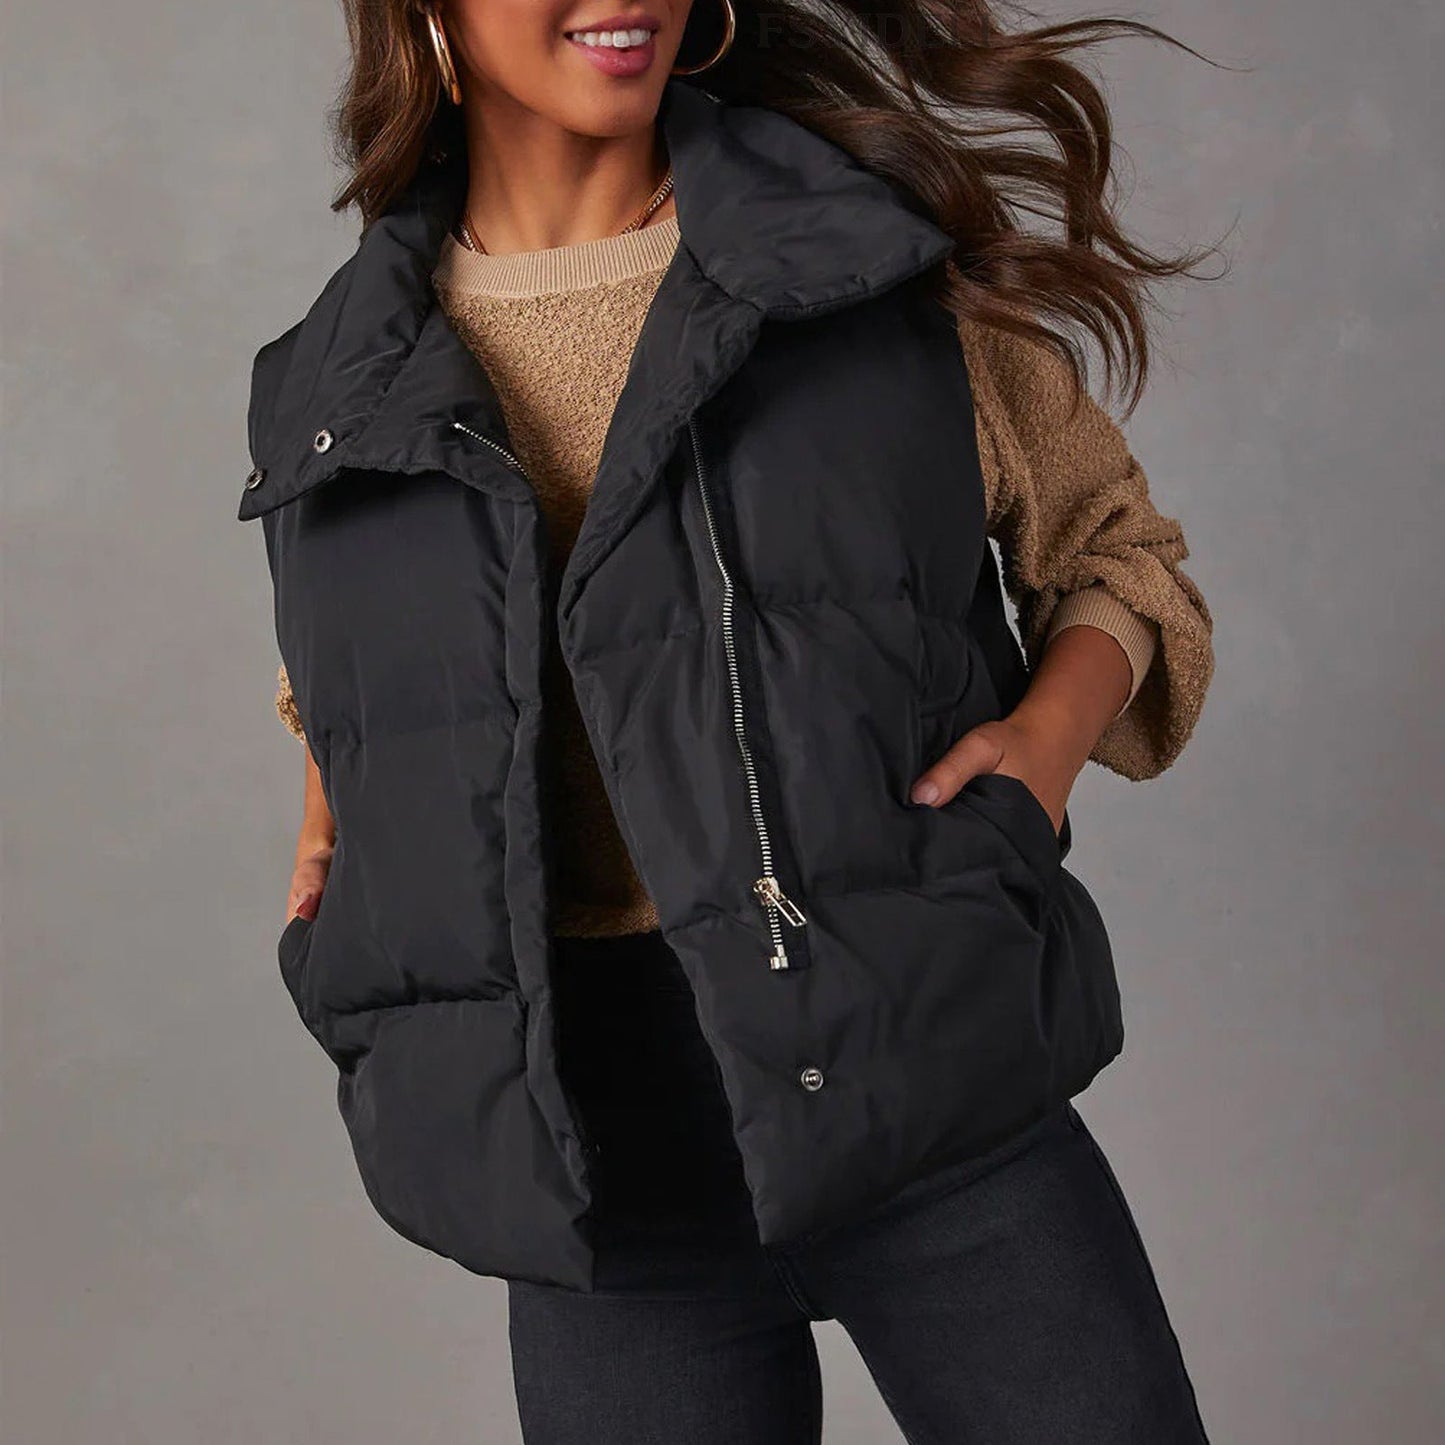 Autumn Winter Solid Color Vest Collared Sleeveless Cotton Padded Jacket Vest Cardigan Women